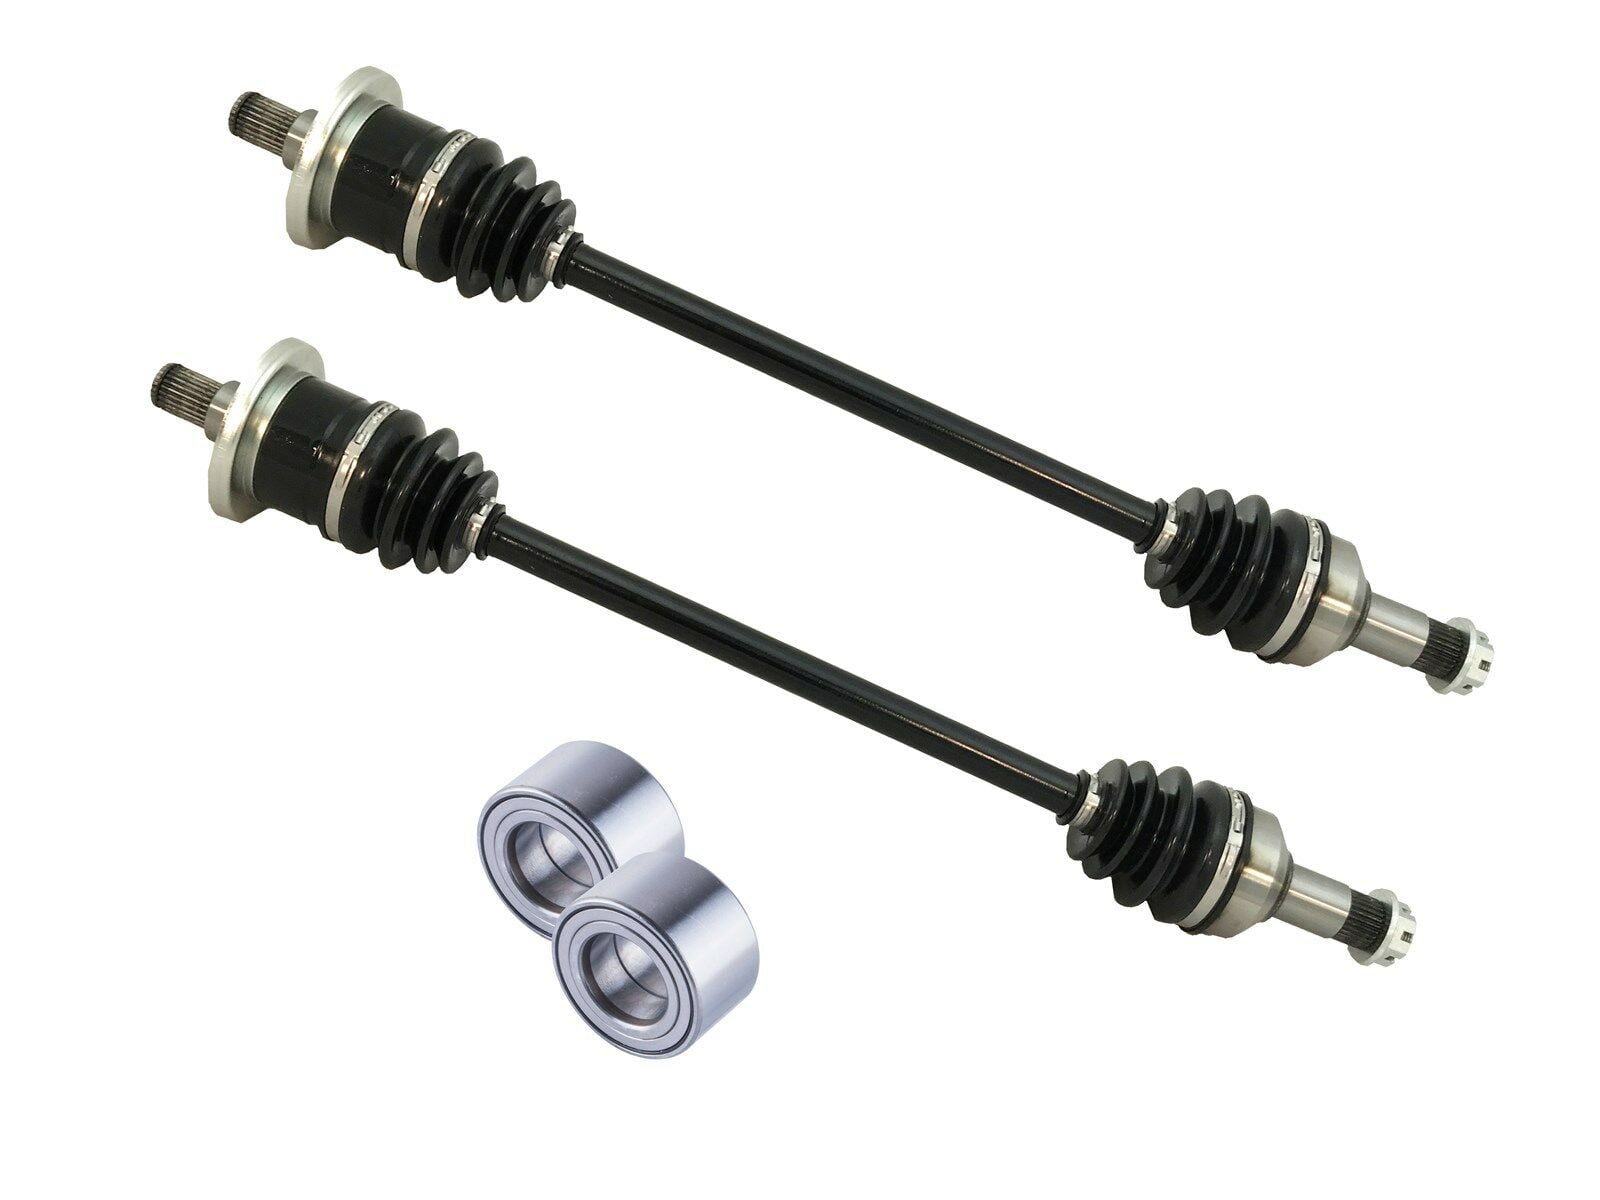 East Lake Axle front cv axles & wheel bearings set compatible with Arctic Cat Prowler 550/650/700/1000 